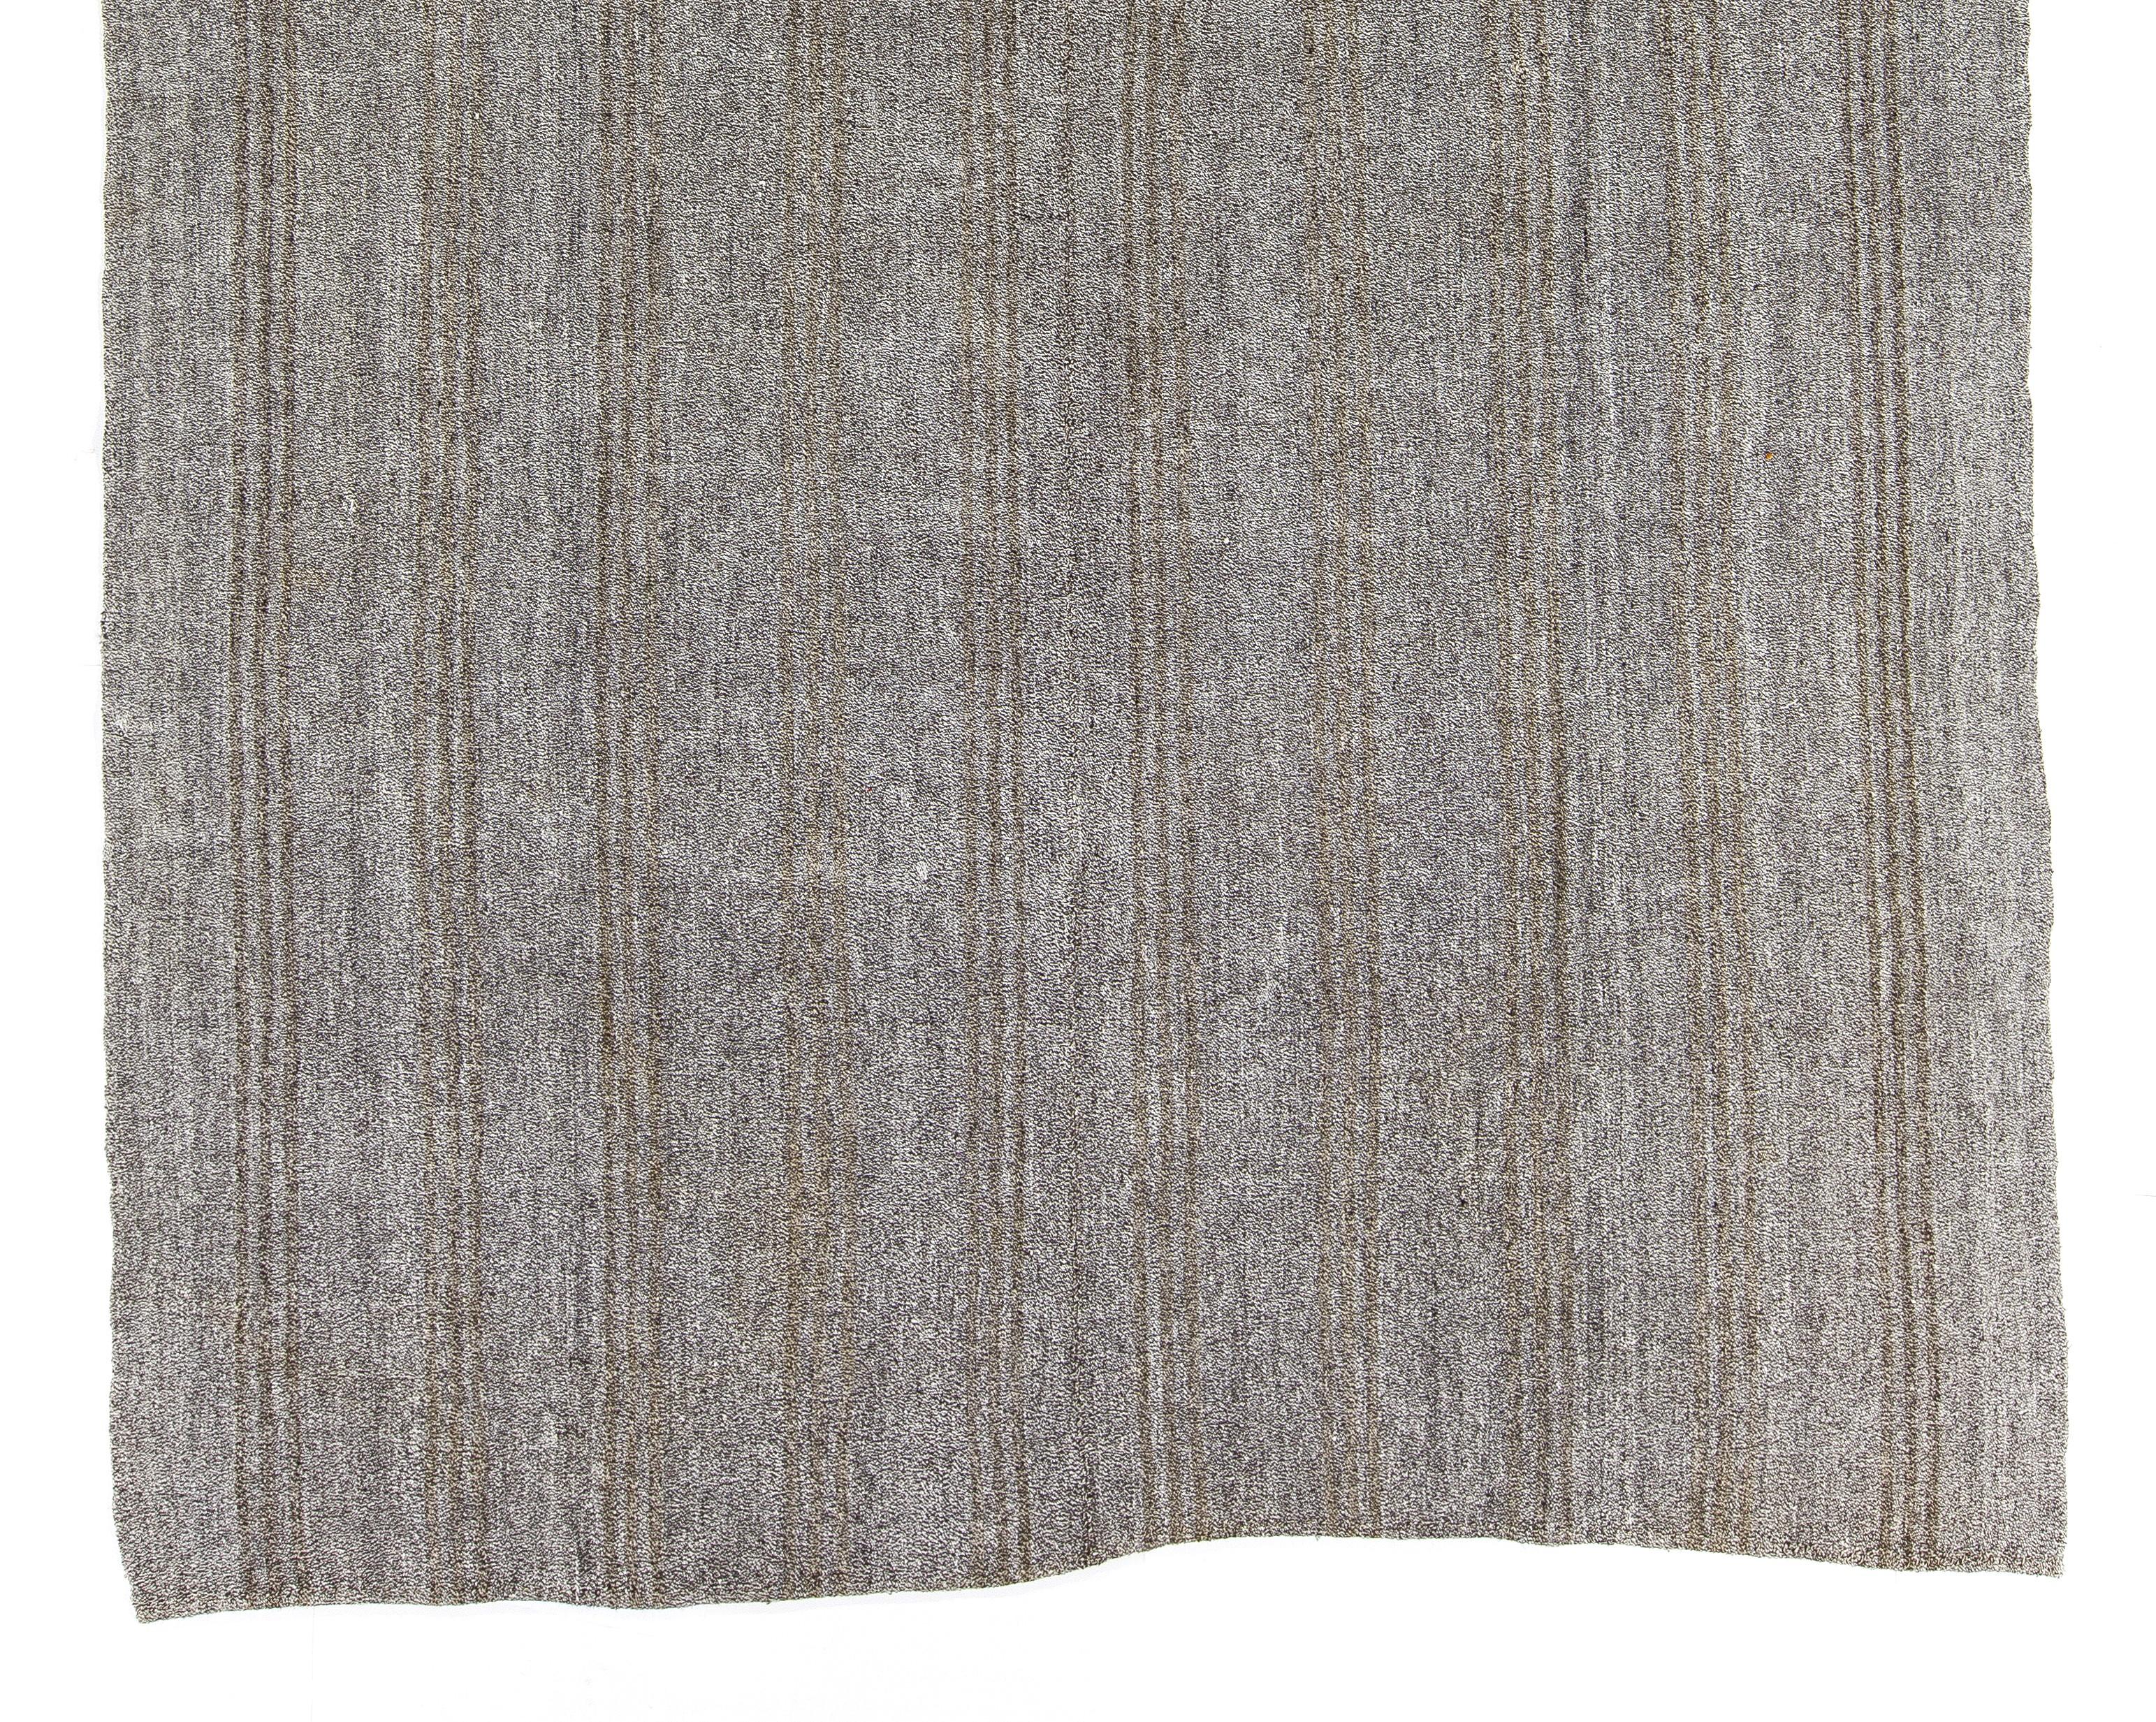 Hand-Woven 7.8x11.5 Ft Natural Goat Wool and Hemp Turkish Kilim, Light Gray & Brown Rug For Sale